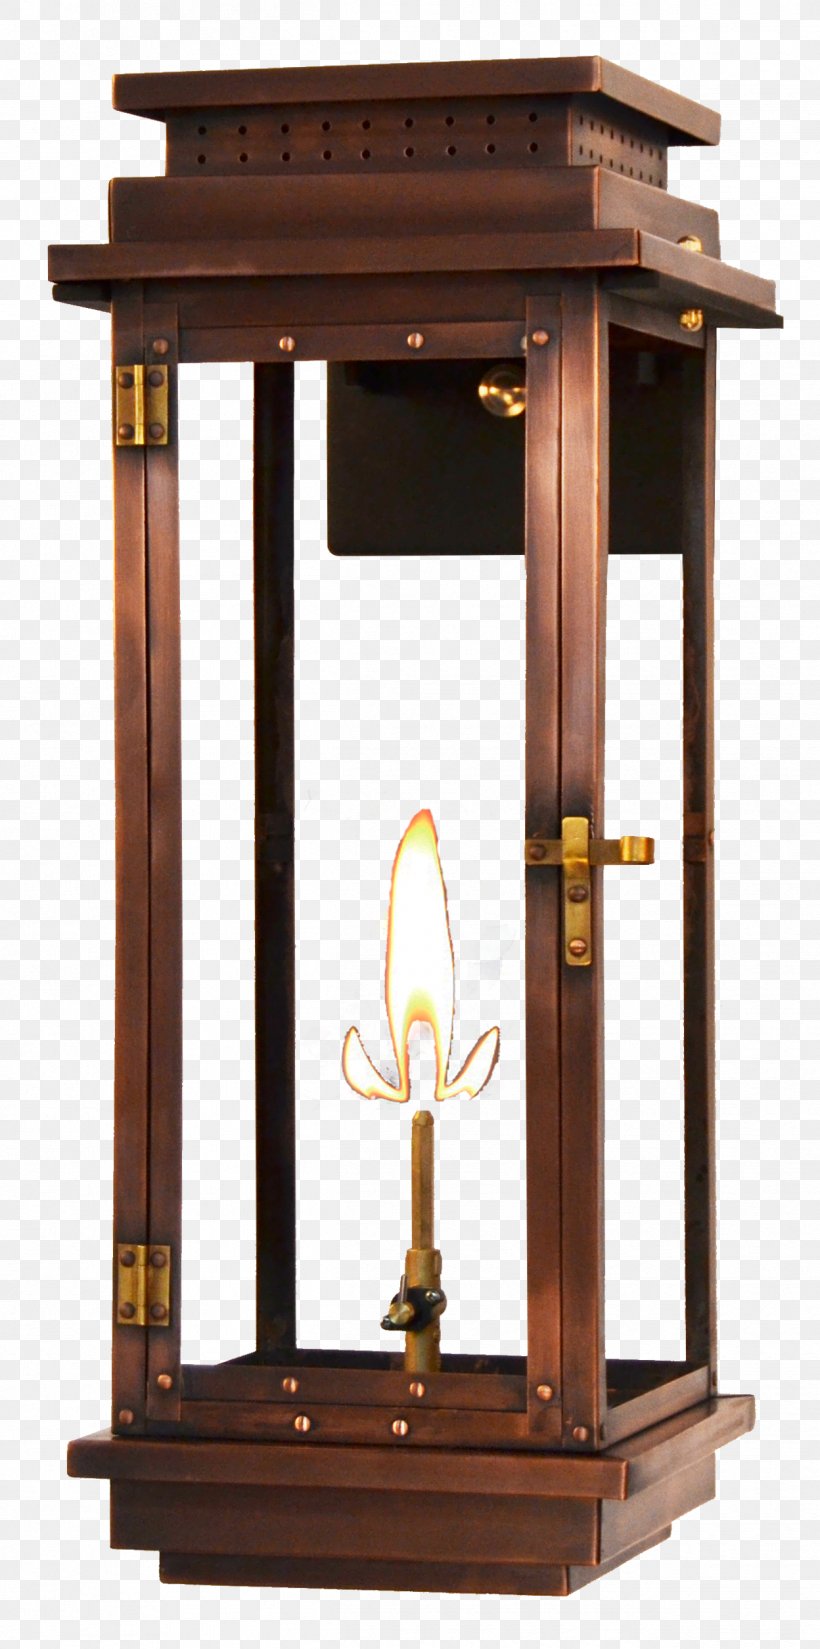 Gas Lighting Coppersmith Flame Electricity, PNG, 1248x2511px, Gas, Balcony, Copper, Coppersmith, Electricity Download Free